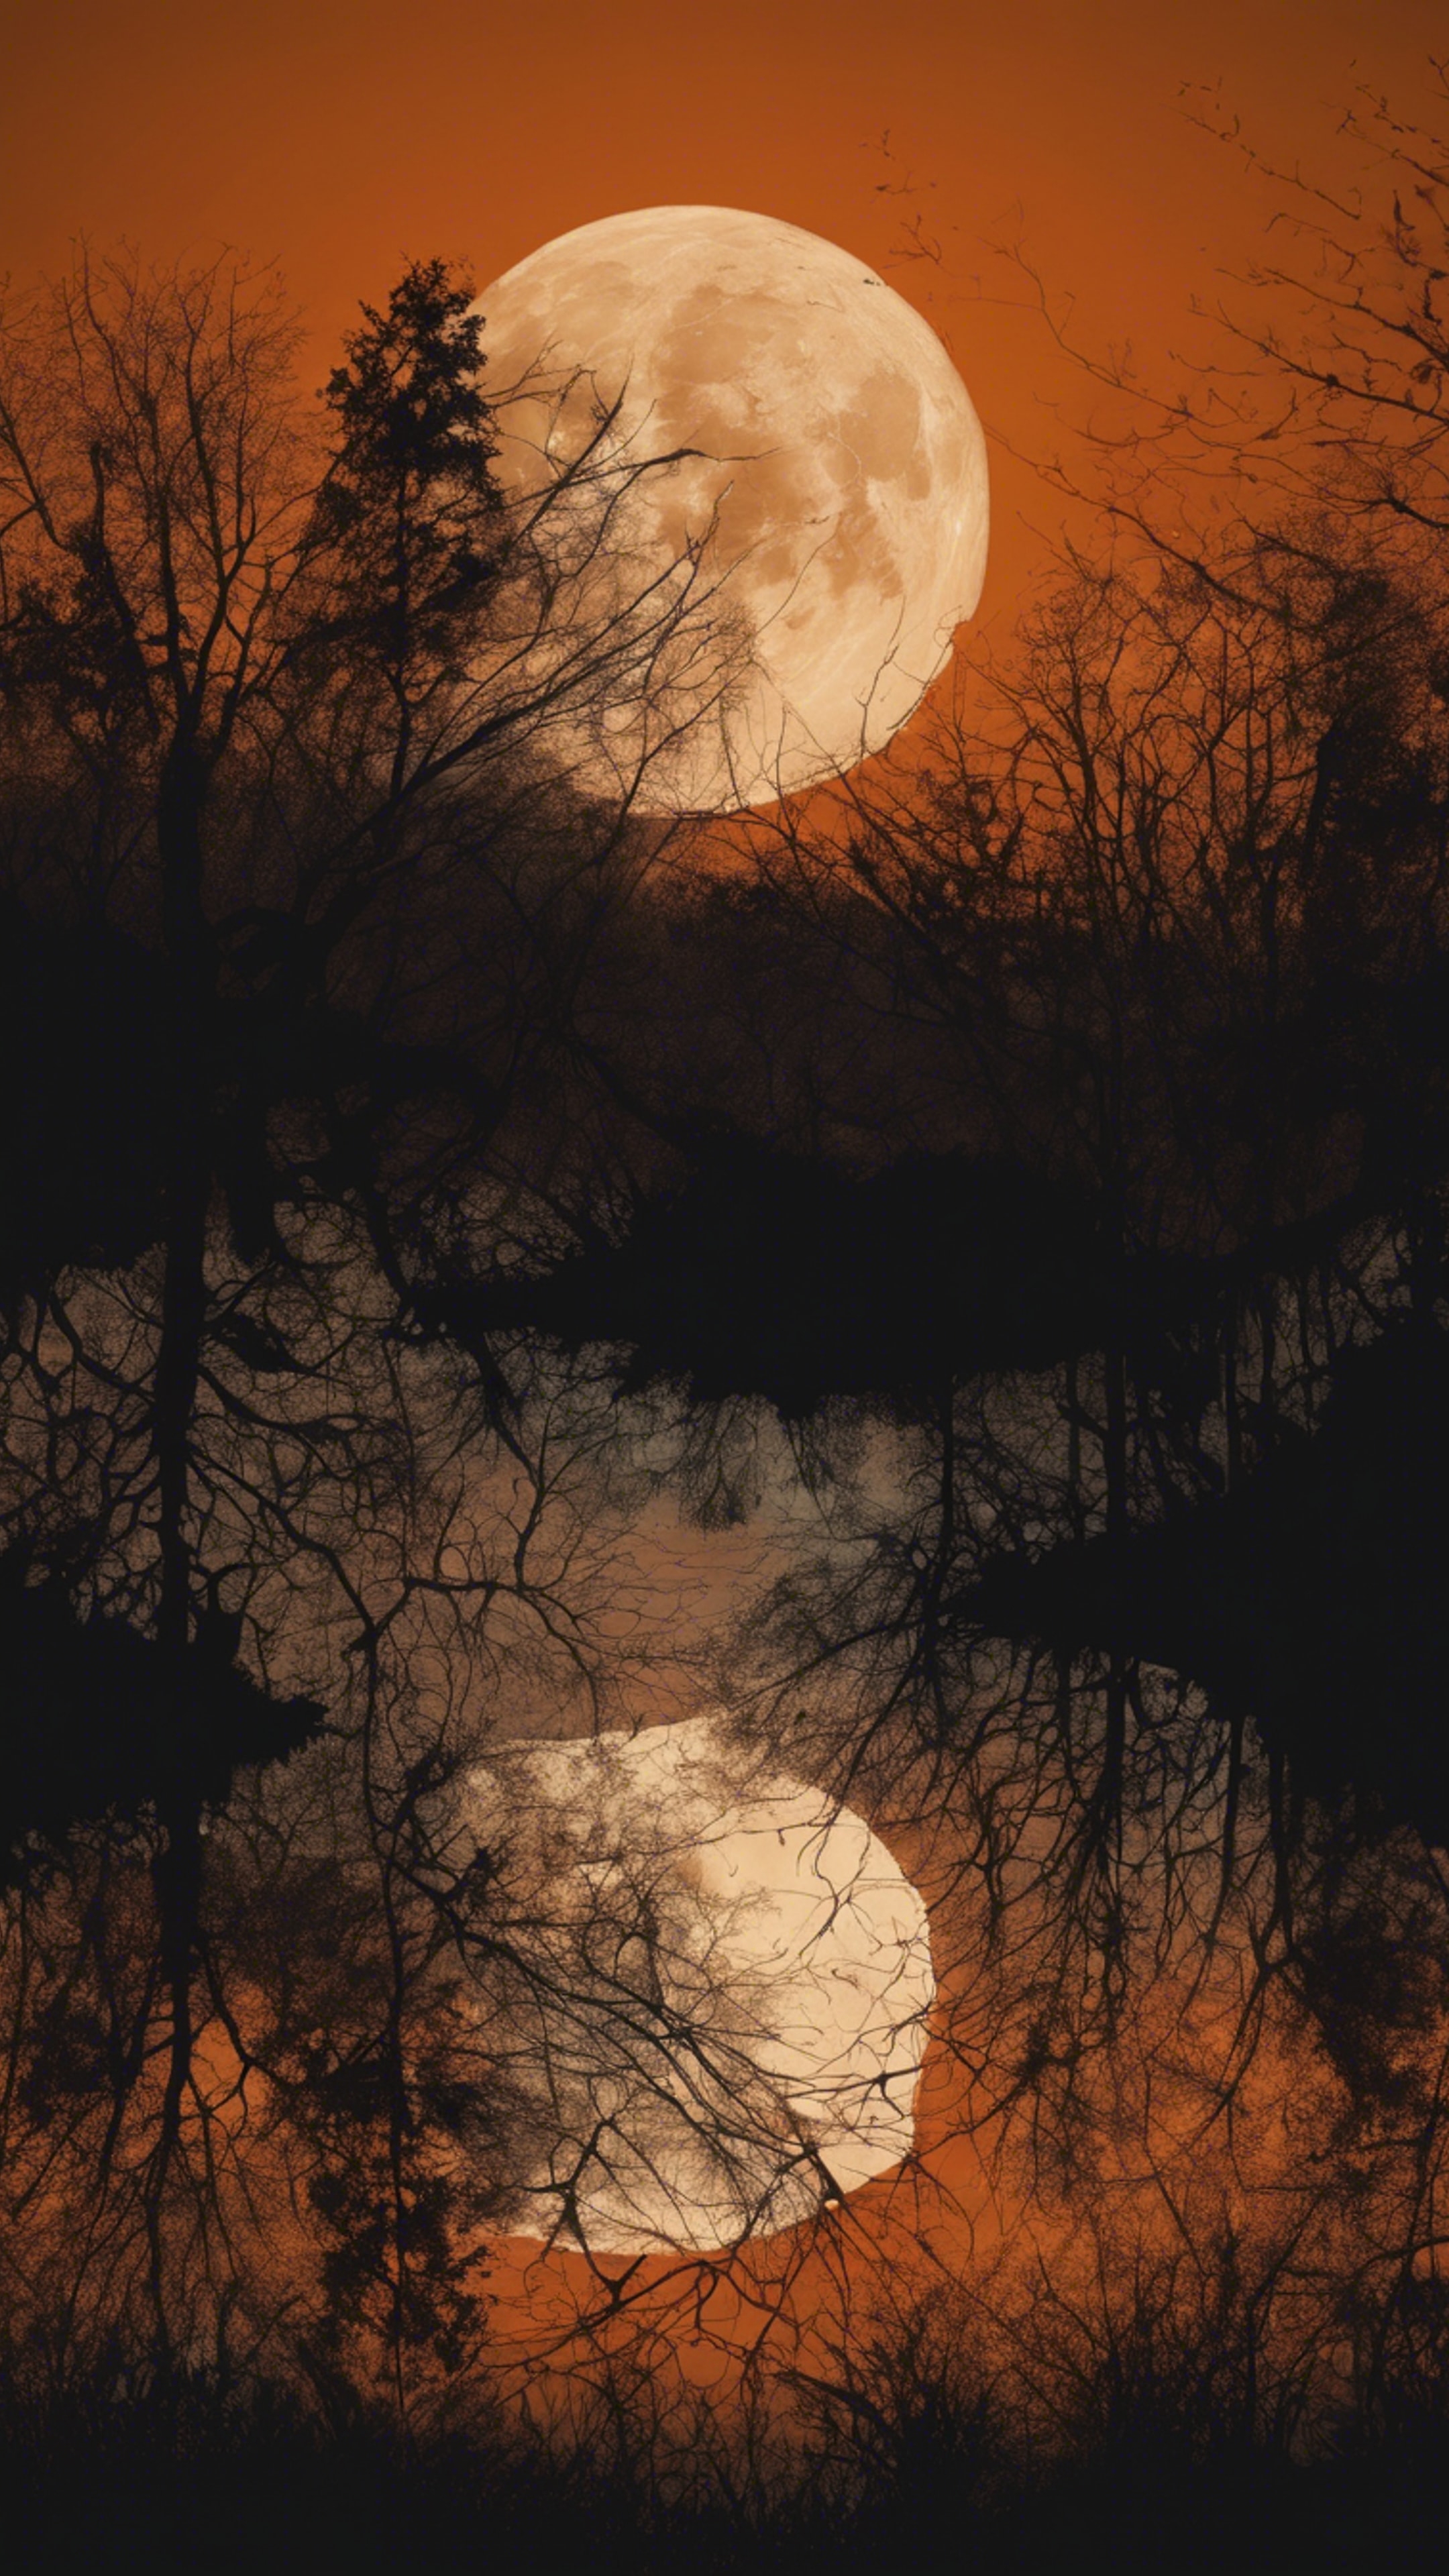 Gleaming full moon over black silhouetted forest contrasted by a deep orange sky. Hintergrund[d3ef8041818348d2b22b]